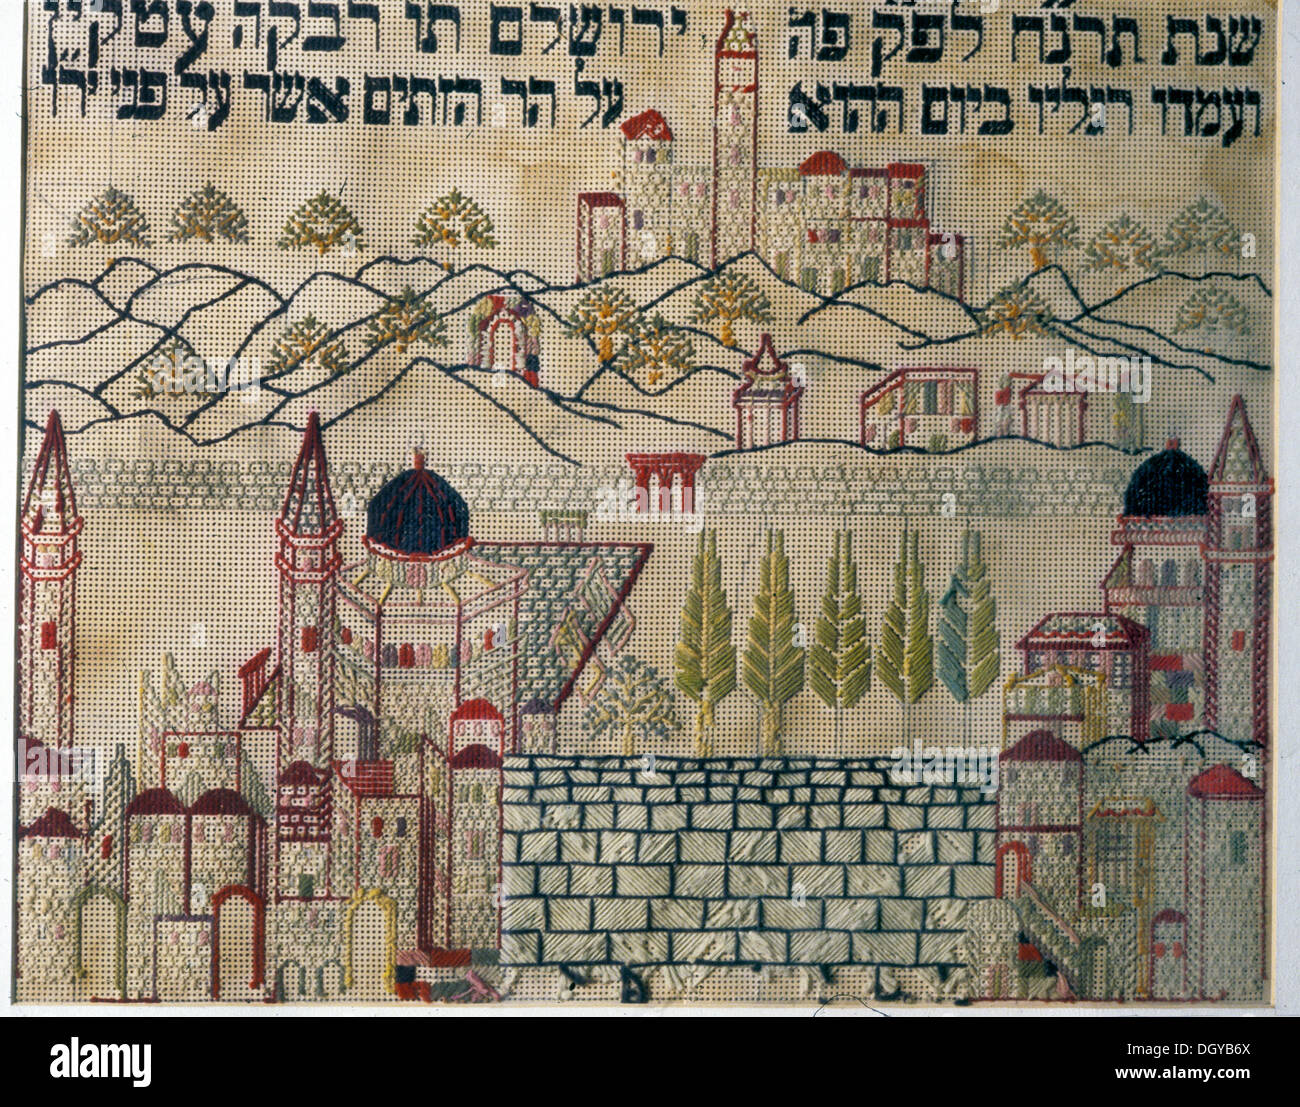 5585. Embroidery called 'East' - stitch sampler hanging on the eastern wall of the mid European Jewish house to indicate the direction of prayer to Jerusalem, western wall in the center. Stock Photo